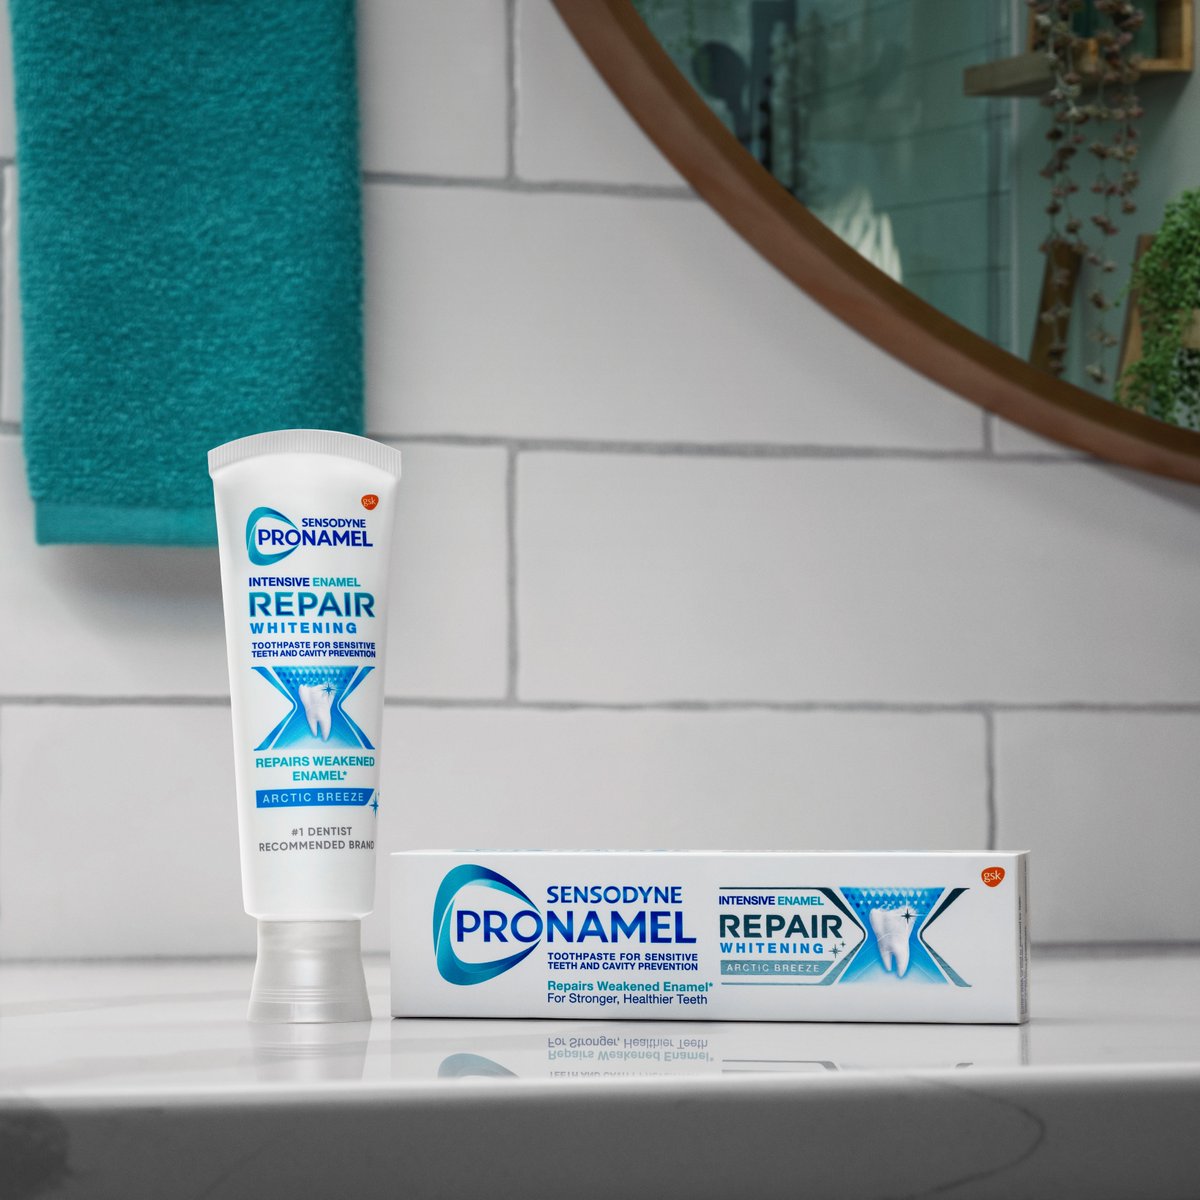 What are some of the benefits when you brush with #Pronamel? 💪 Strengthens acid-weakened enamel 💎 Helps lock in minerals into enamel 🪥 Freshens breath ❄️Provides sensitivity relief and lasting sensitivity protection